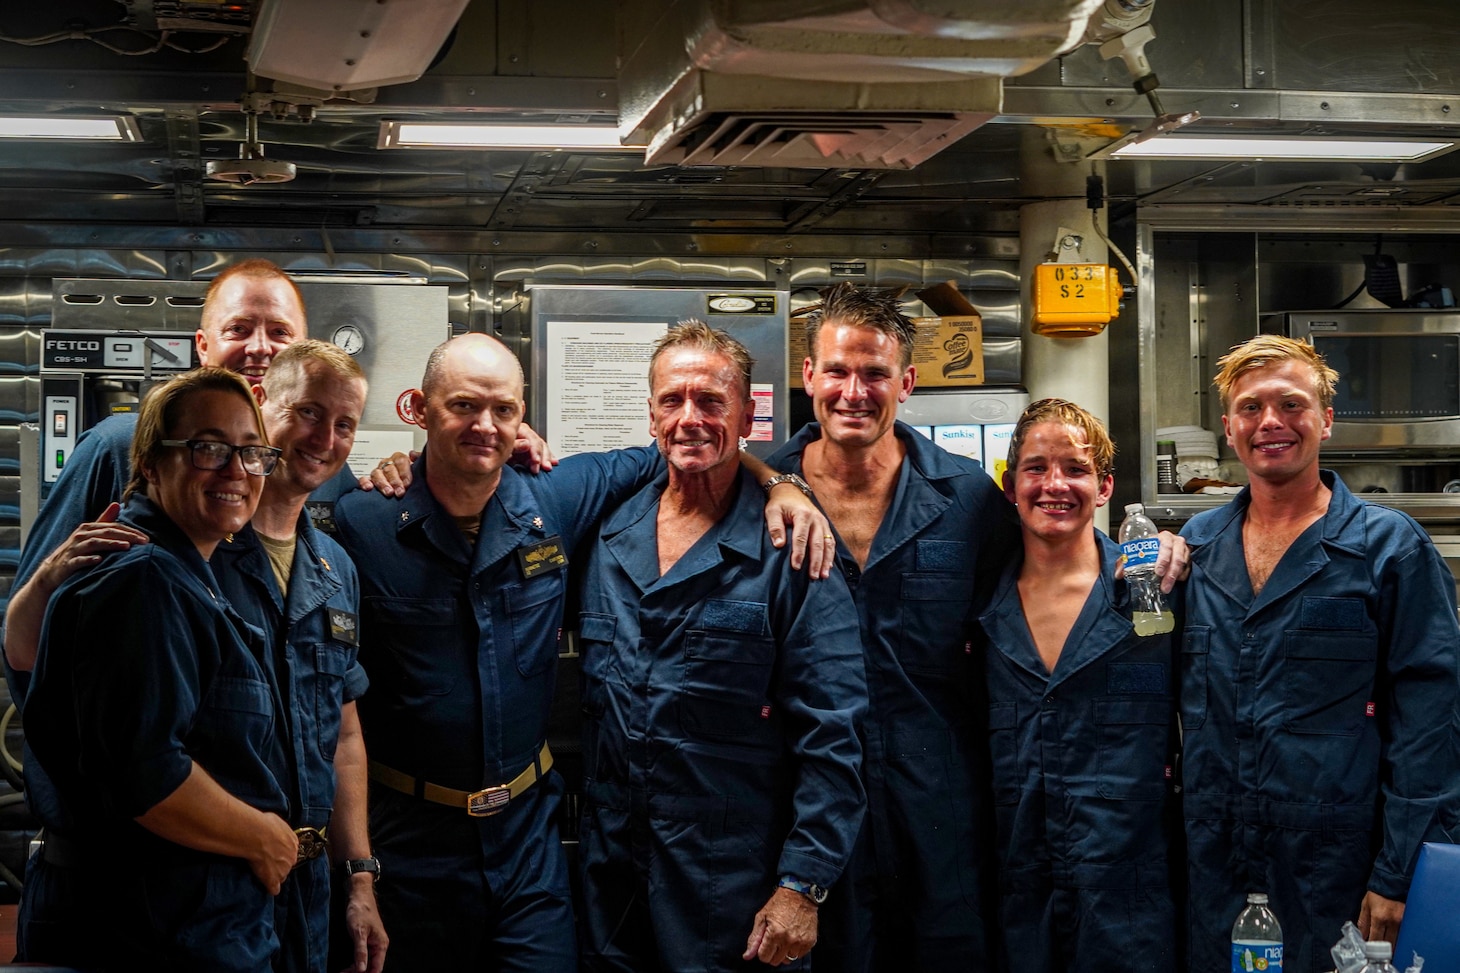 Sailors assigned to Arleigh Burke-class guided-missile destroyer USS Porter (DDG 78) pose with Ben Wiggins, Daniel Williams, Evan Williams, and Luke Lodge (left to right) after rescuing the divers at sea off the coast of Wilmington, N.C. Porter’s assistance in rescuing the divers is an example of the U.S. Navy’s unique multi-role mission to ensuring safety at sea.